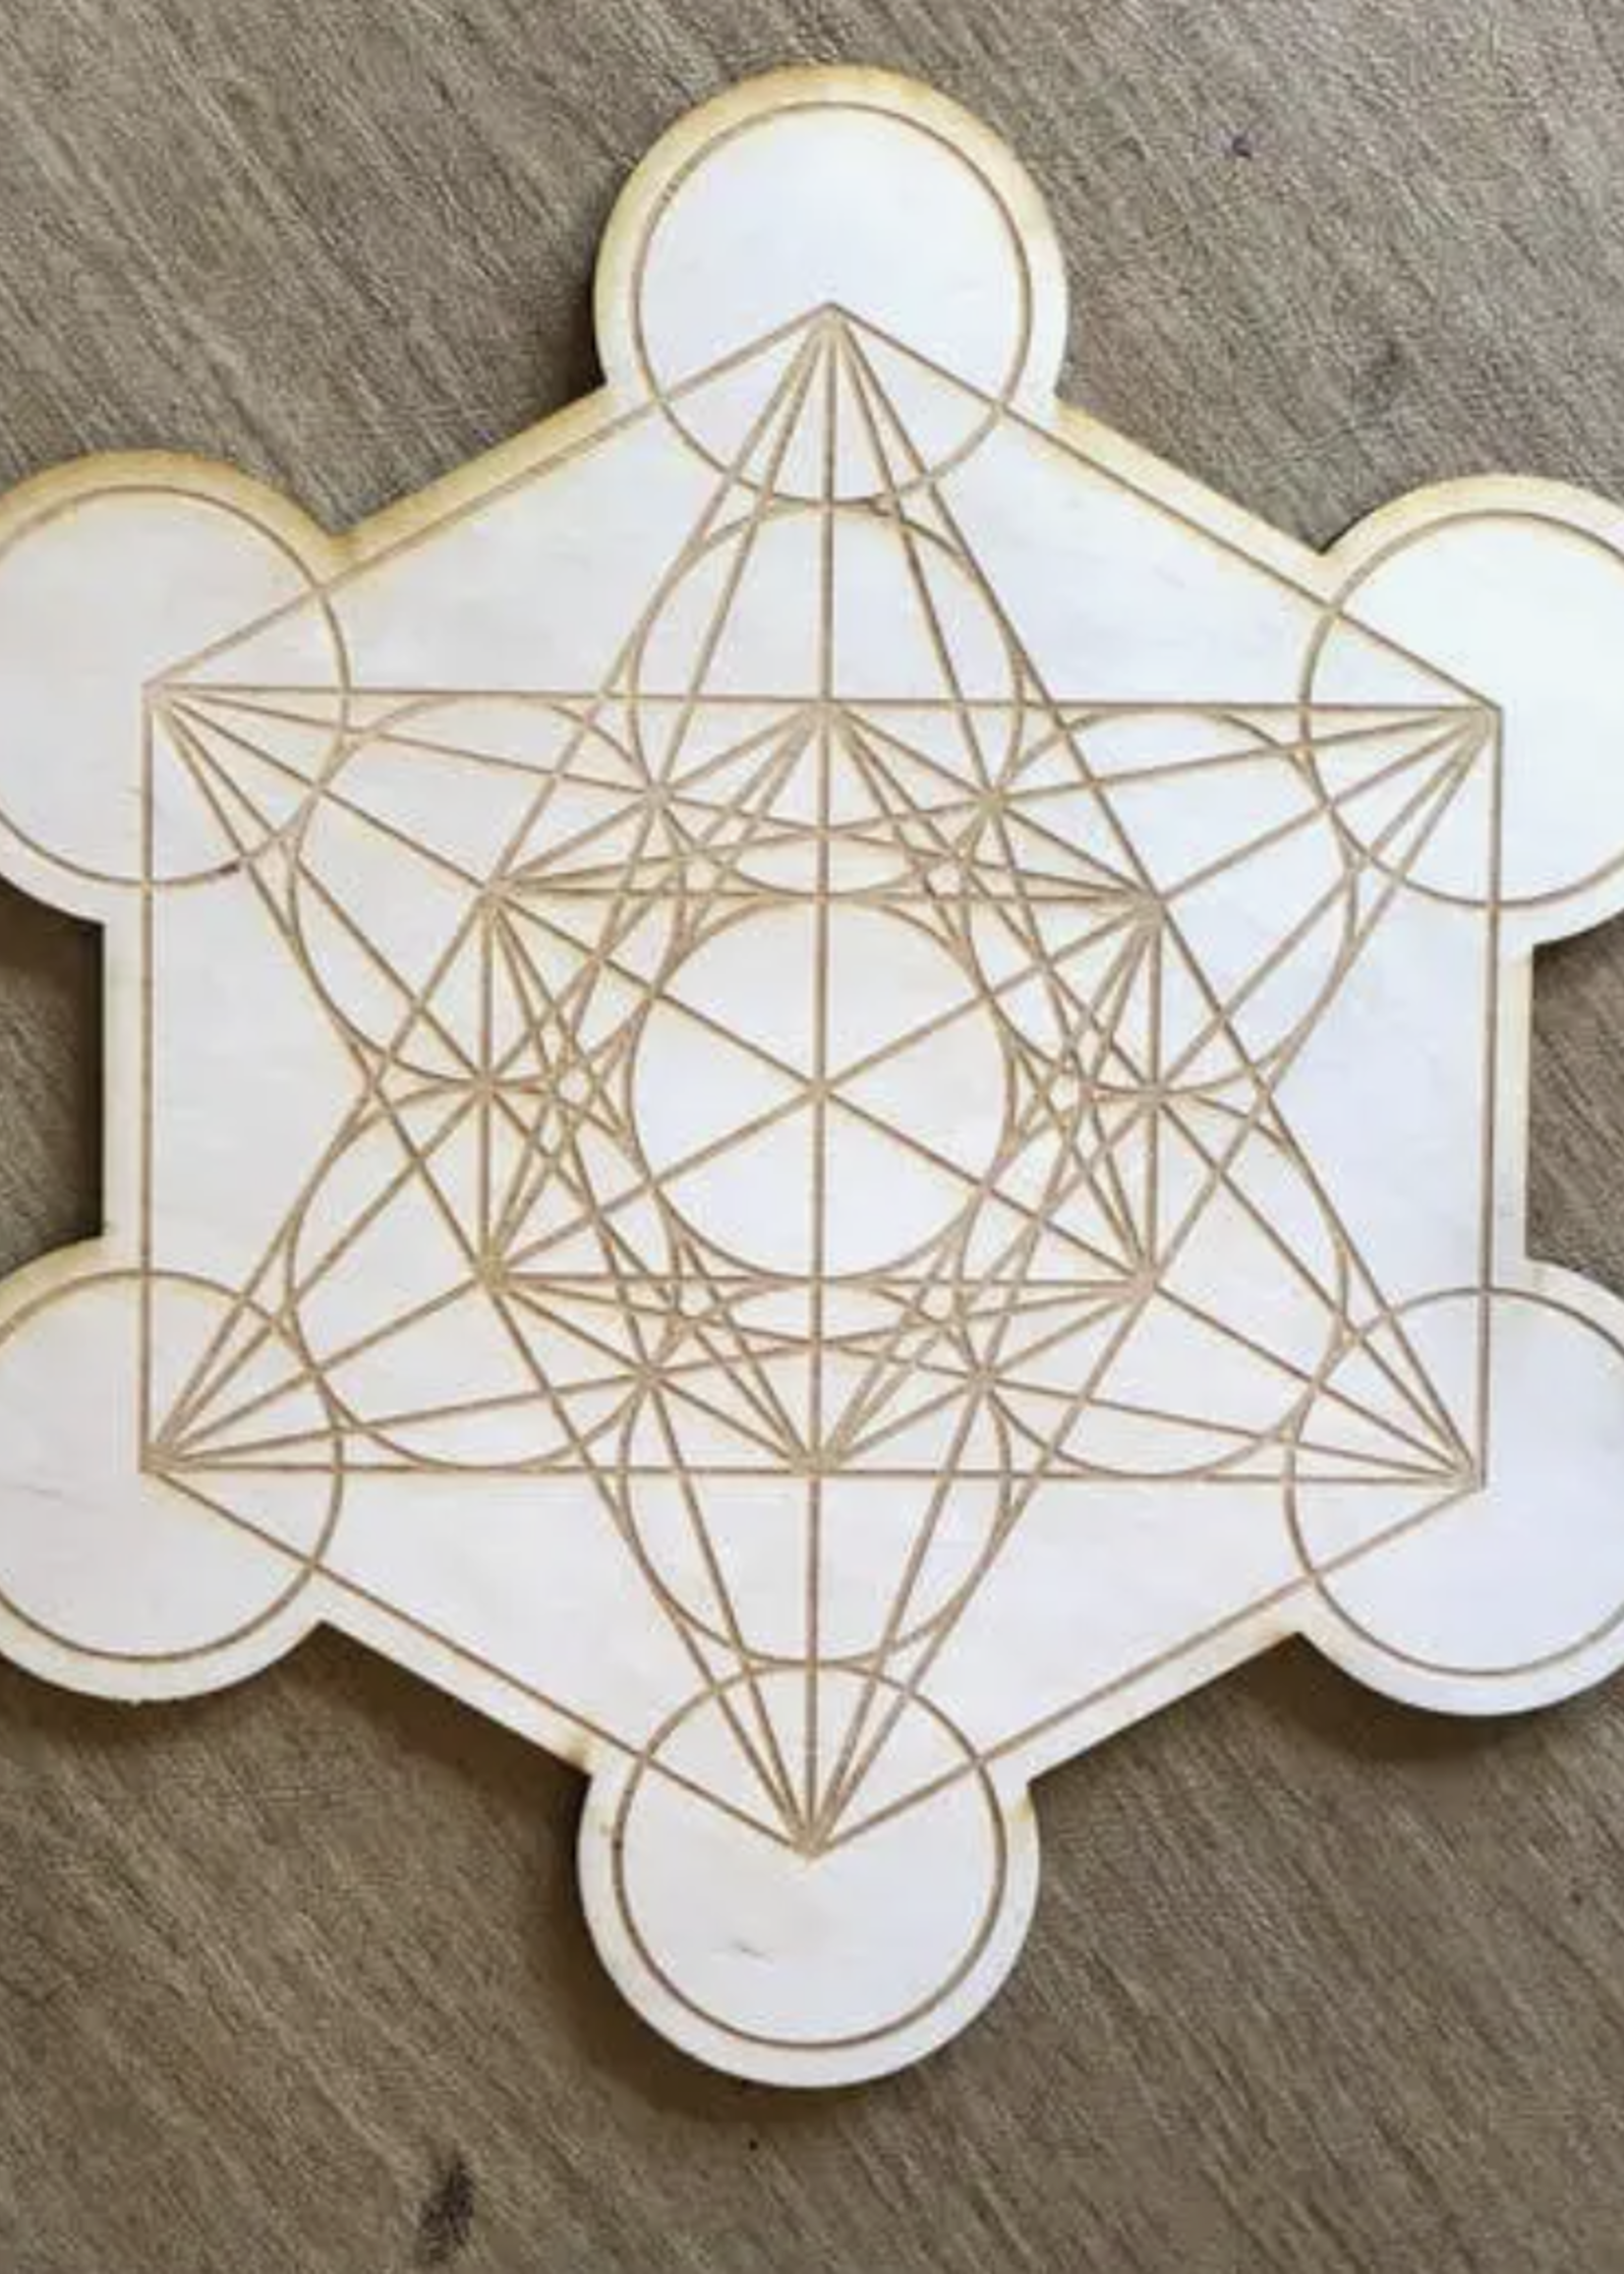 Zen and Meow Metatron's Cube Crystal Grid